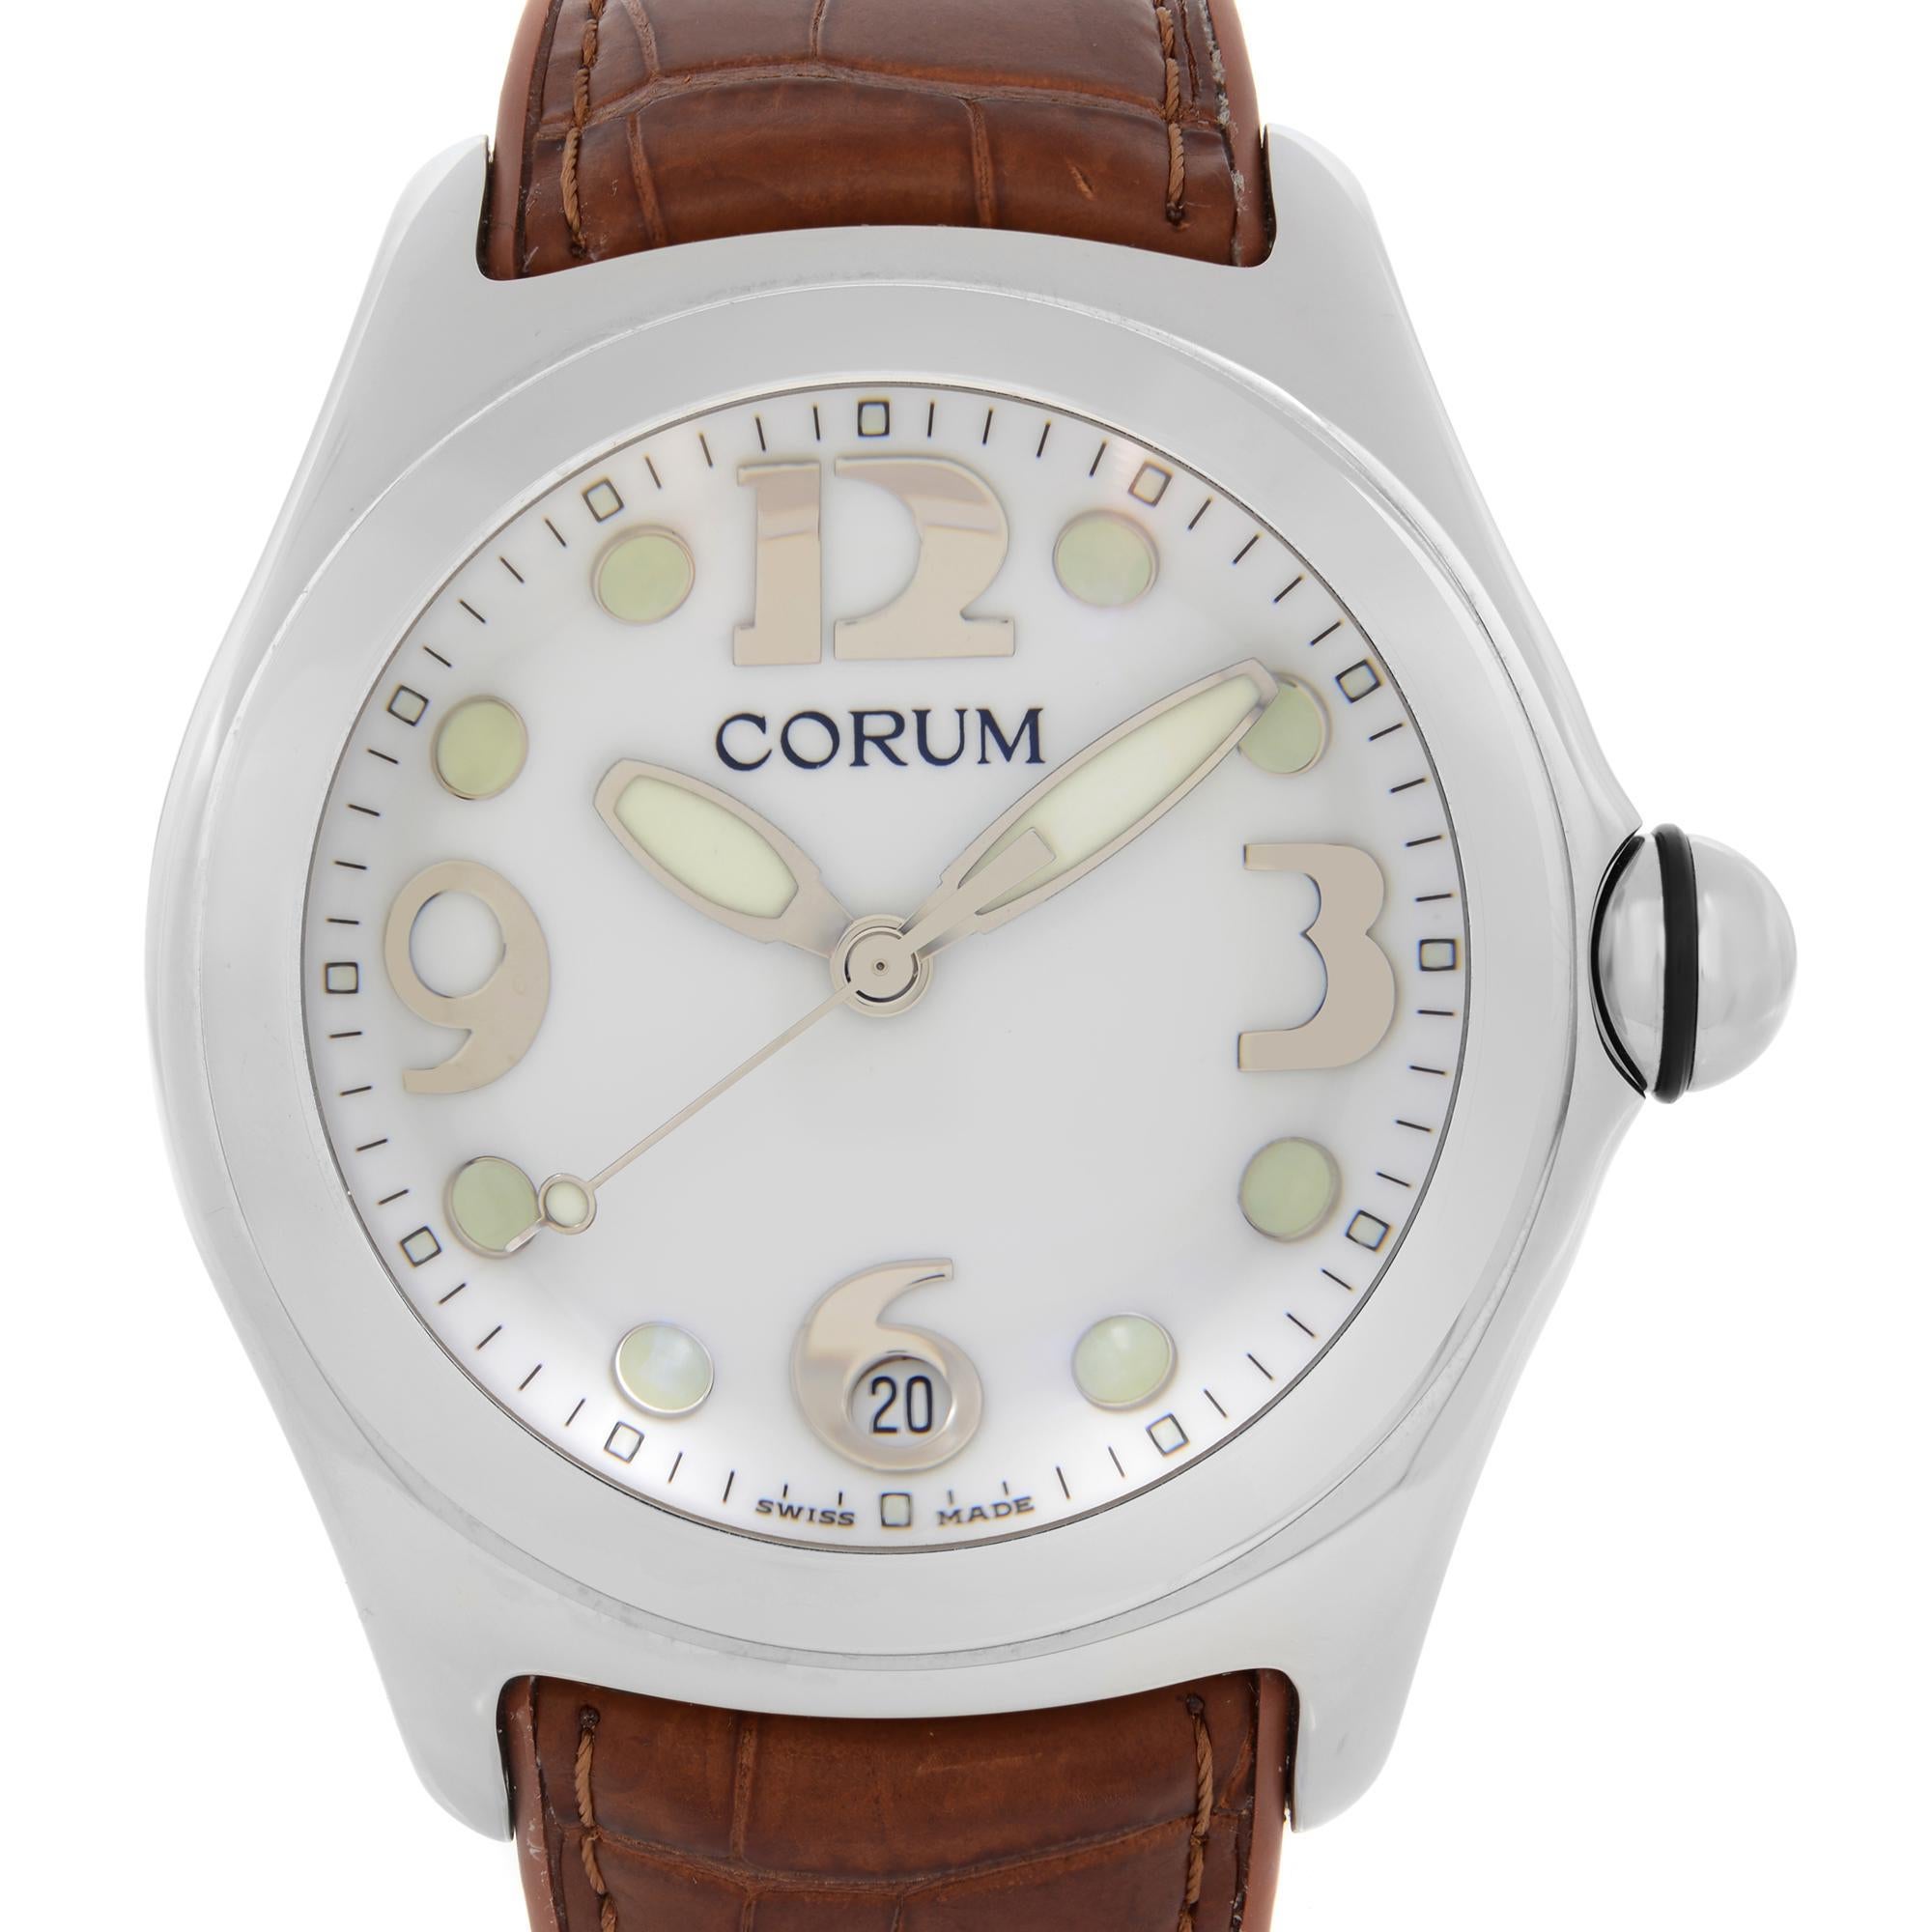 Pre-owned Corum Bubble XL 45mm Stainless Steel White Dial Leather Quarts Watch 163.150.20. This Beautiful Men's Timepiece is Powered by an Quartz Movement and Features: Stainless Steel Case with a Brown Leather Strap, Fixed Stainless Steel Bezel